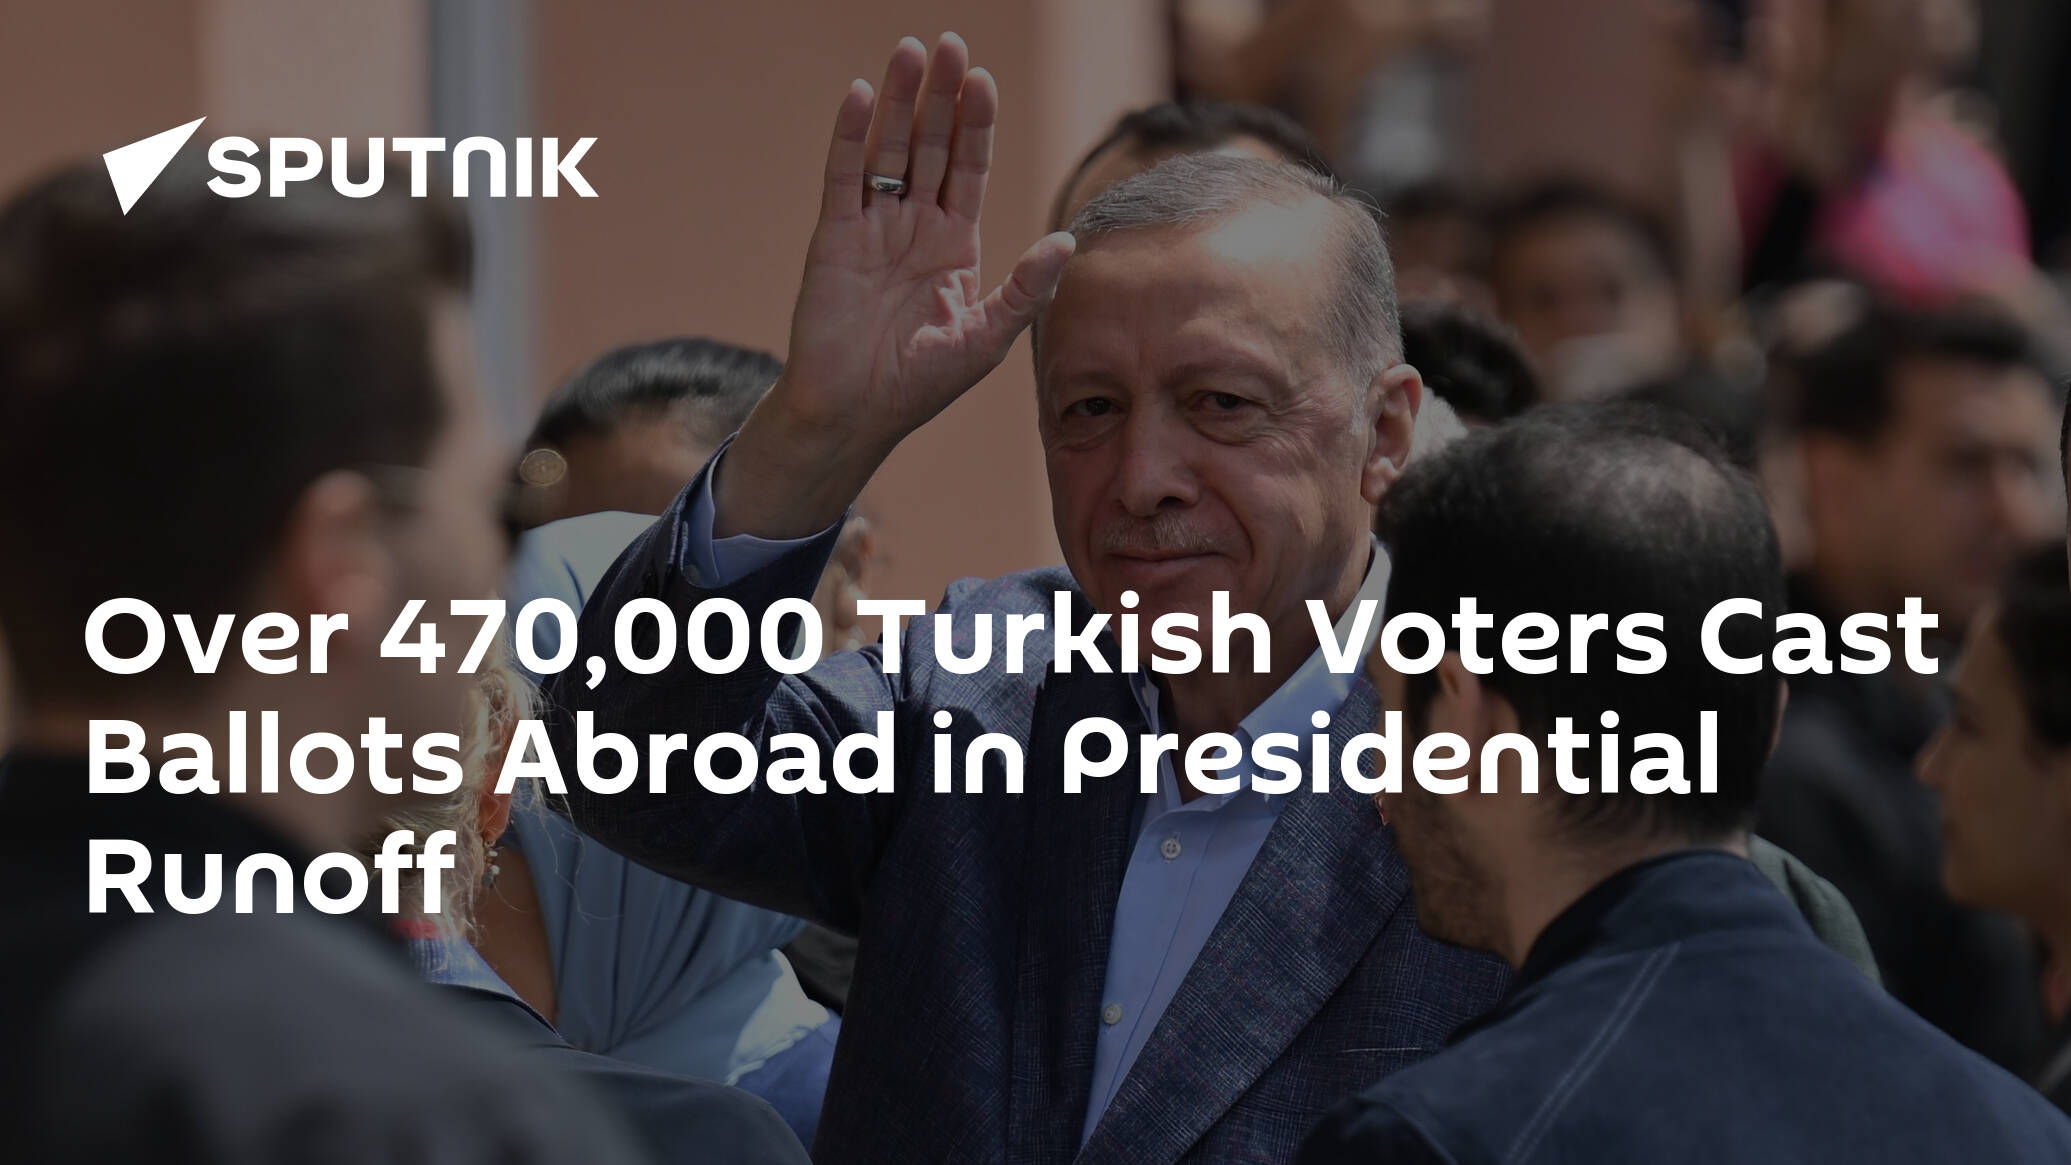 Over 470,000 Turkish Voters Cast Ballots Abroad in Presidential Runoff